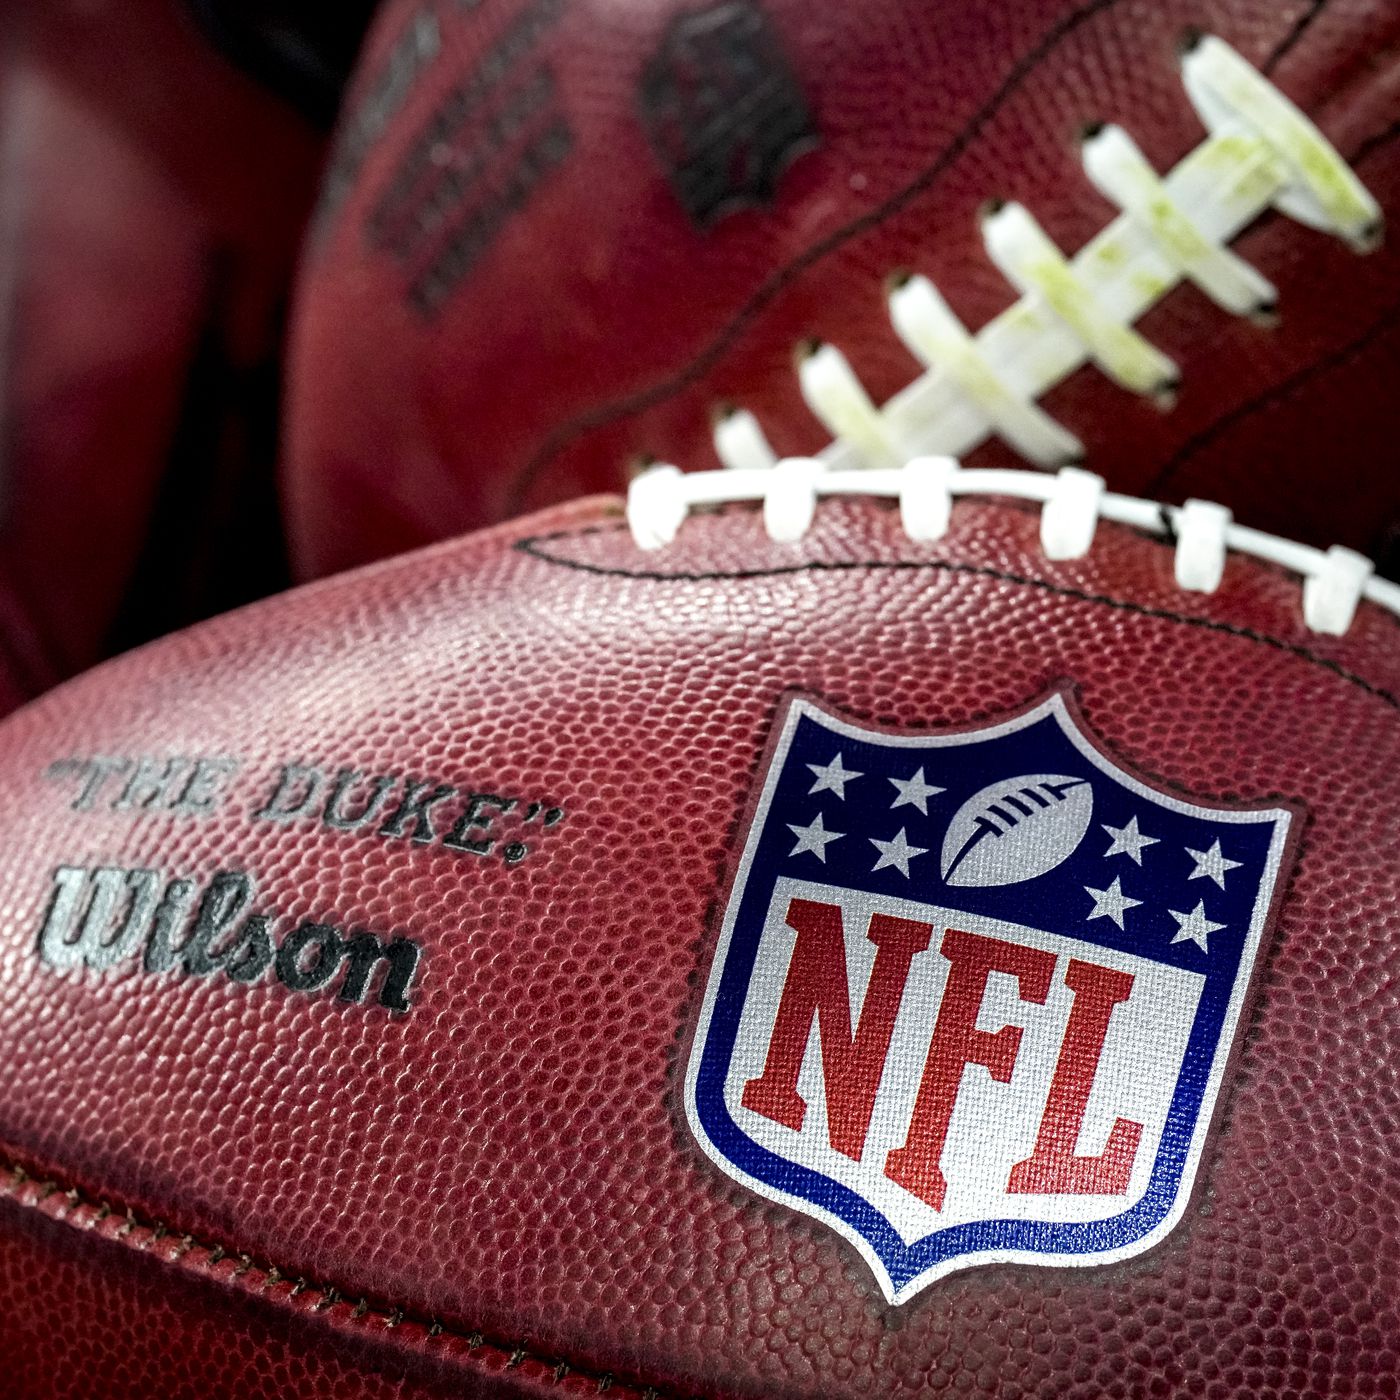 538 nfl game predictions